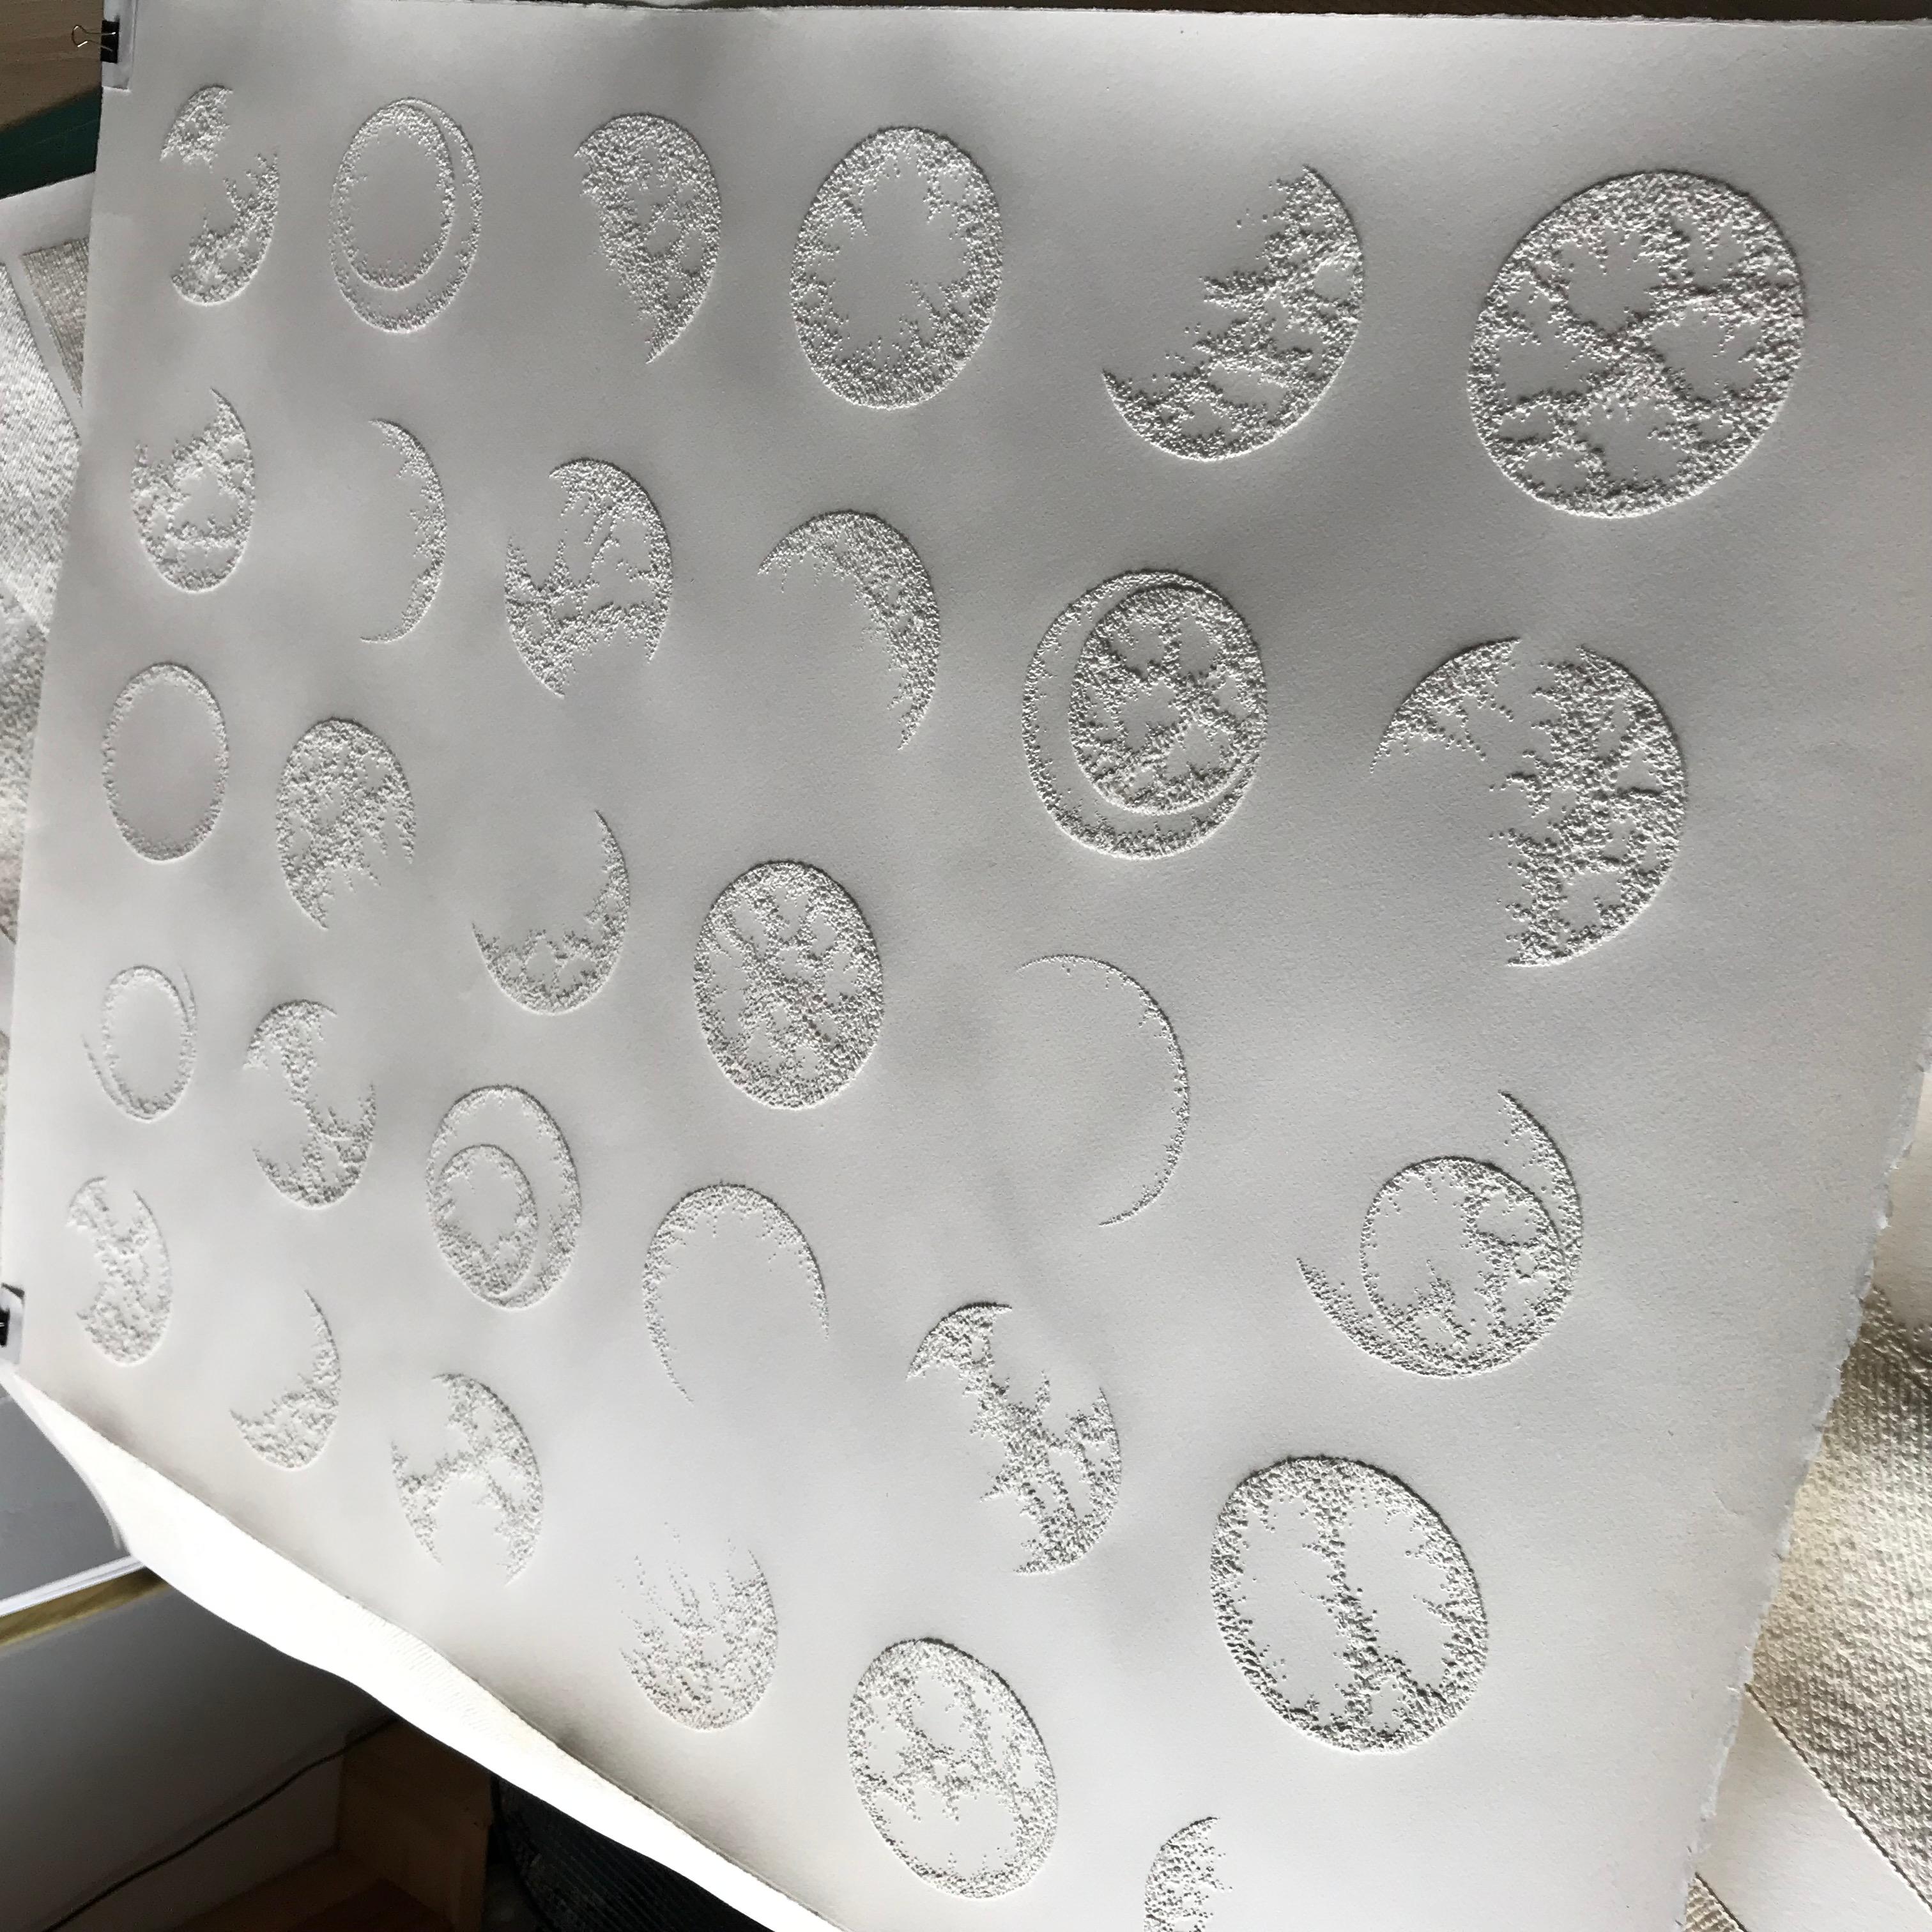 Antonin Anzil Abstract Sculpture - 30 Moon Circles - intricate white 3D abstract geometric pulled paper drawing 